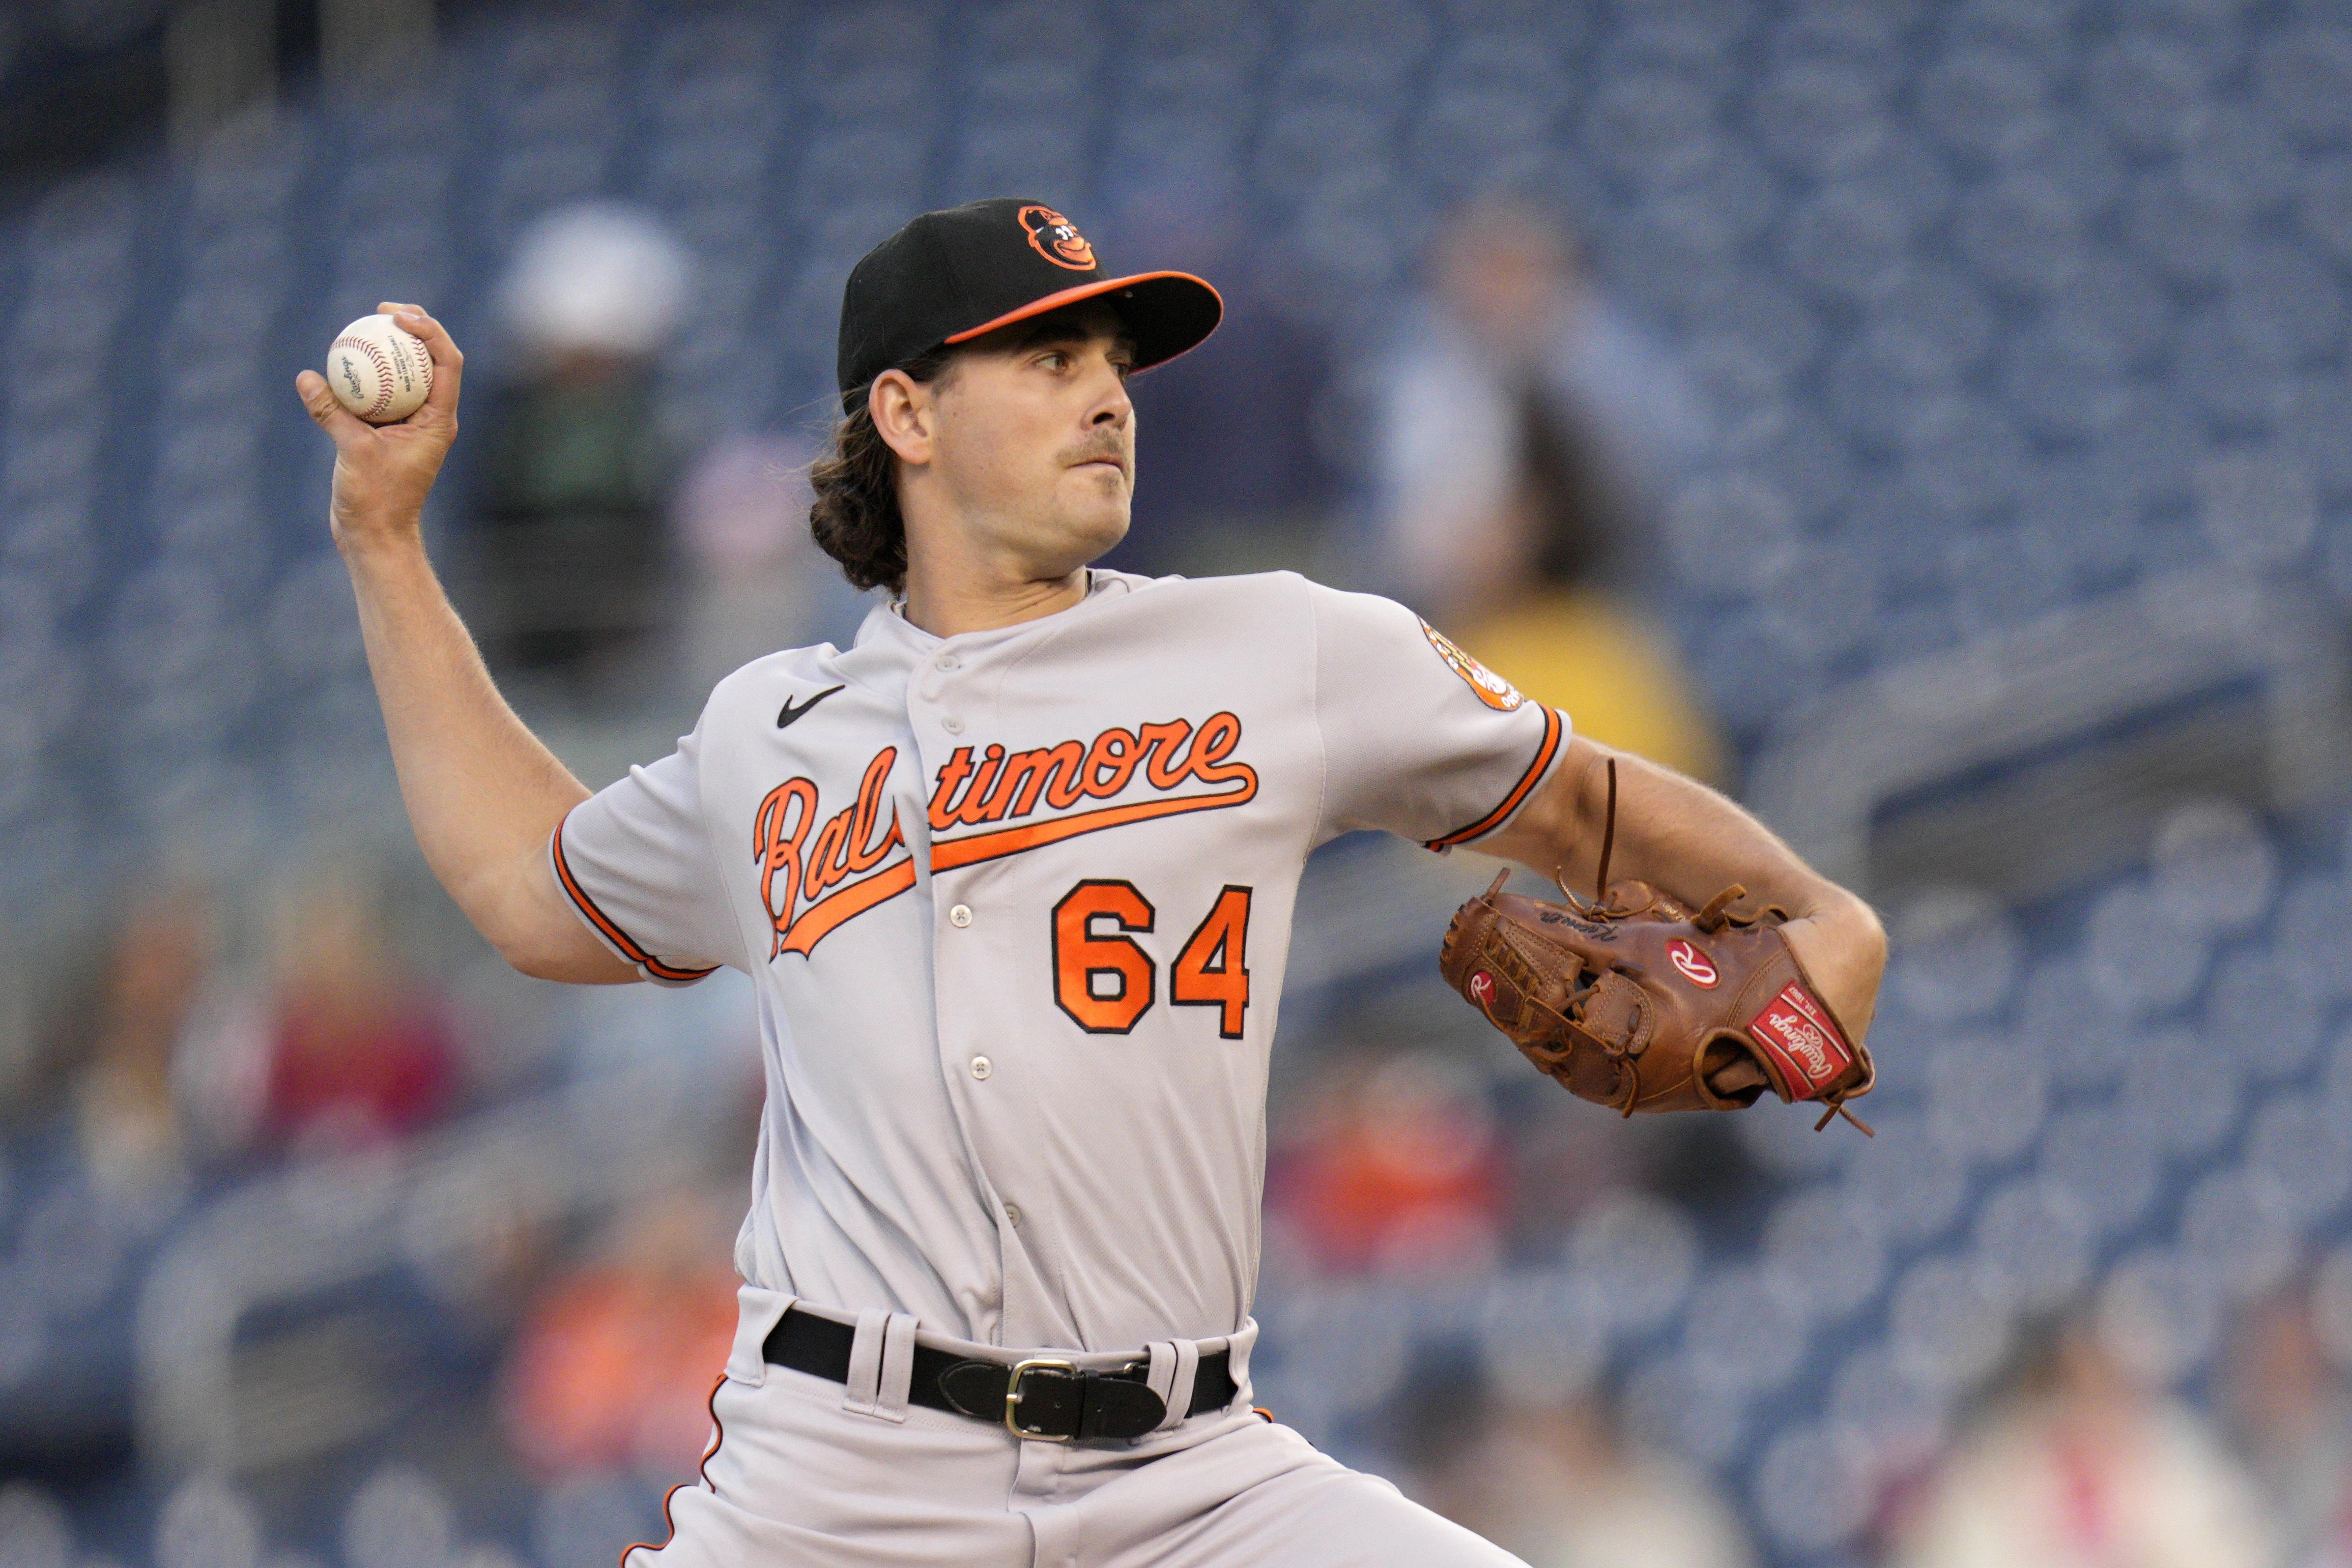 Dean Kremer sharp for Orioles in 1-0 win over Nationals - Washington Times